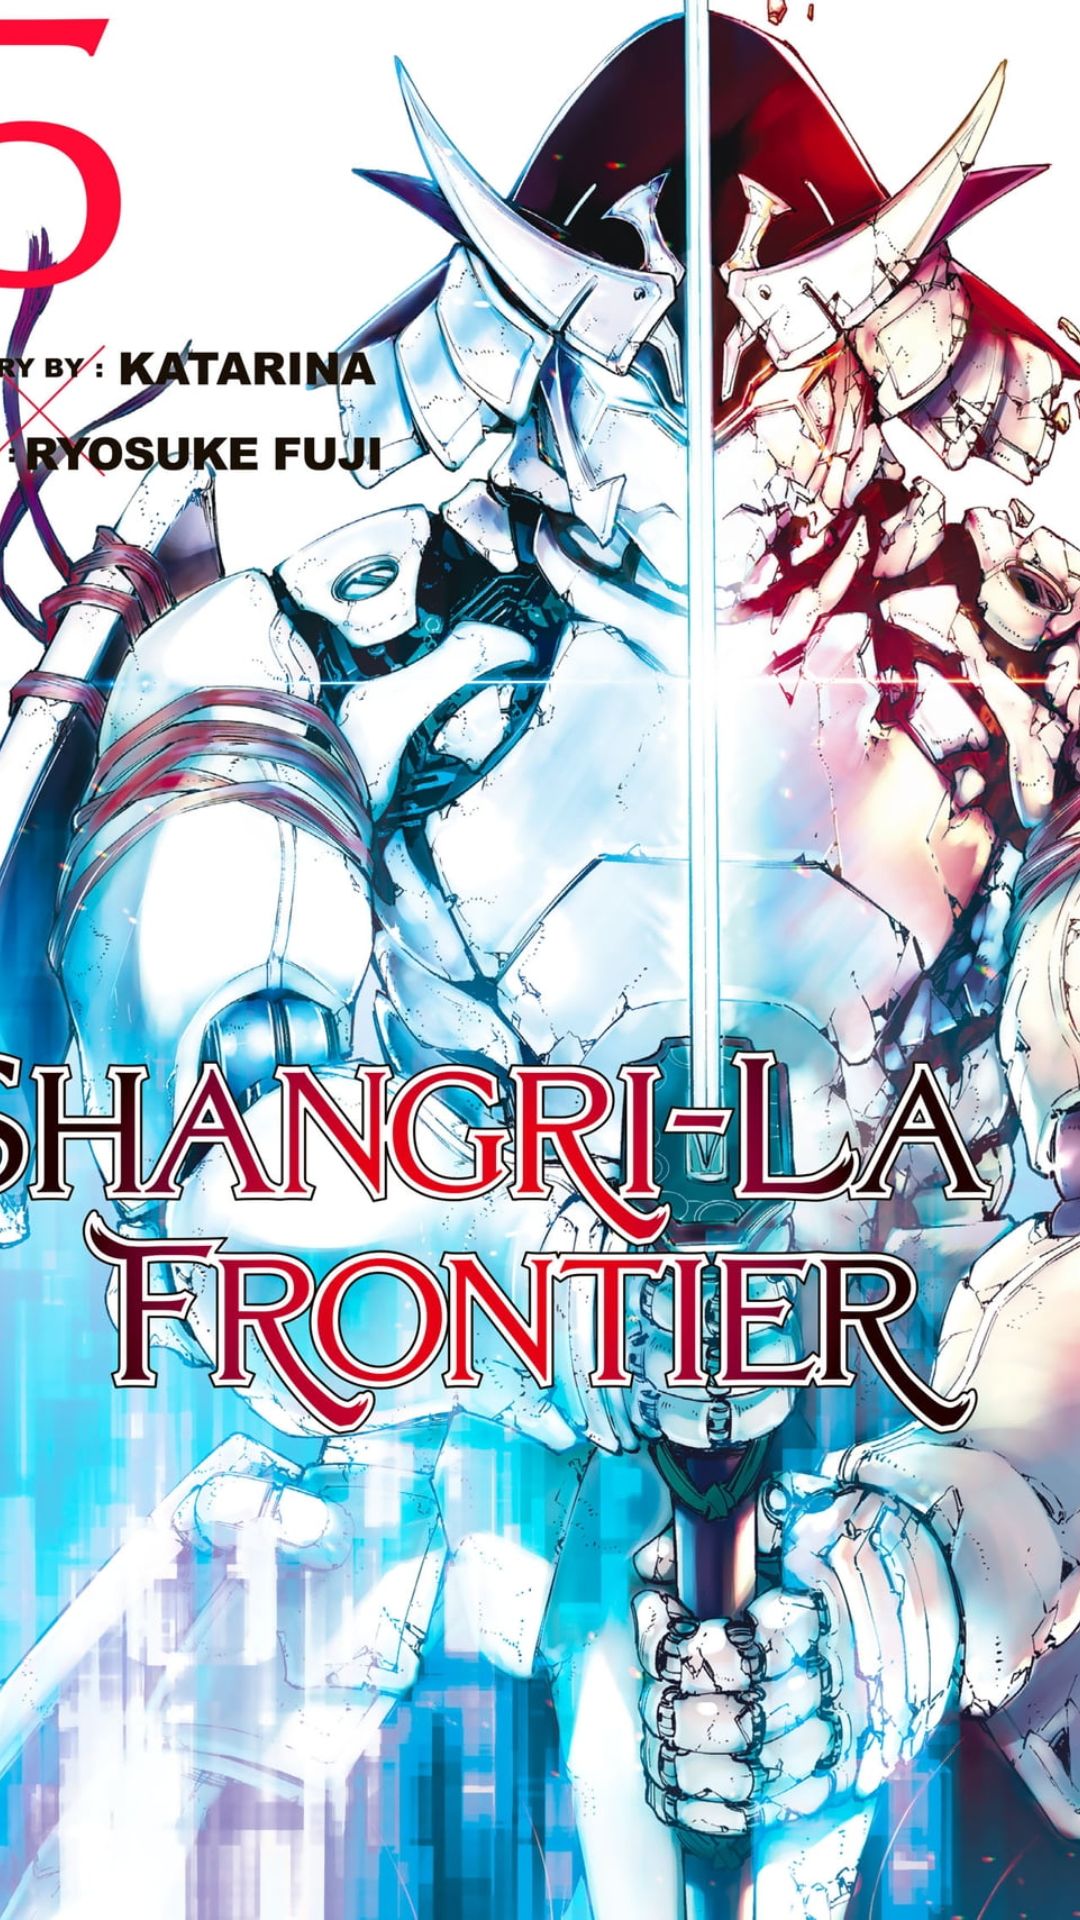 'ShangriLa Frontier' Novel Receives TV Anime and Game